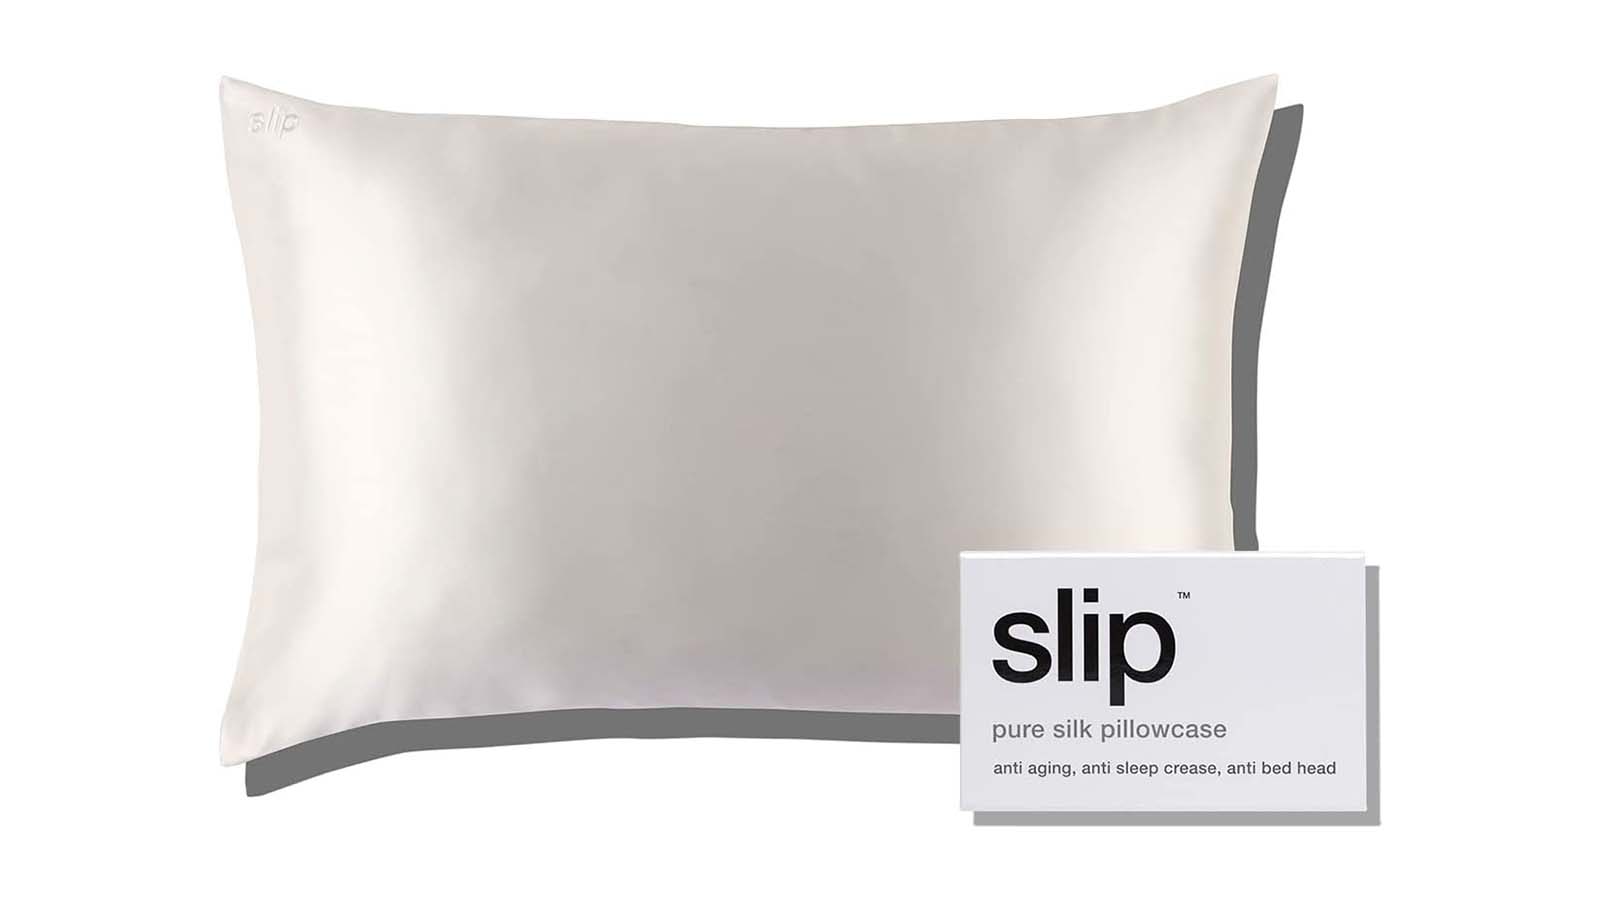 The search for a pillow continues Unsponsored sleep & glow